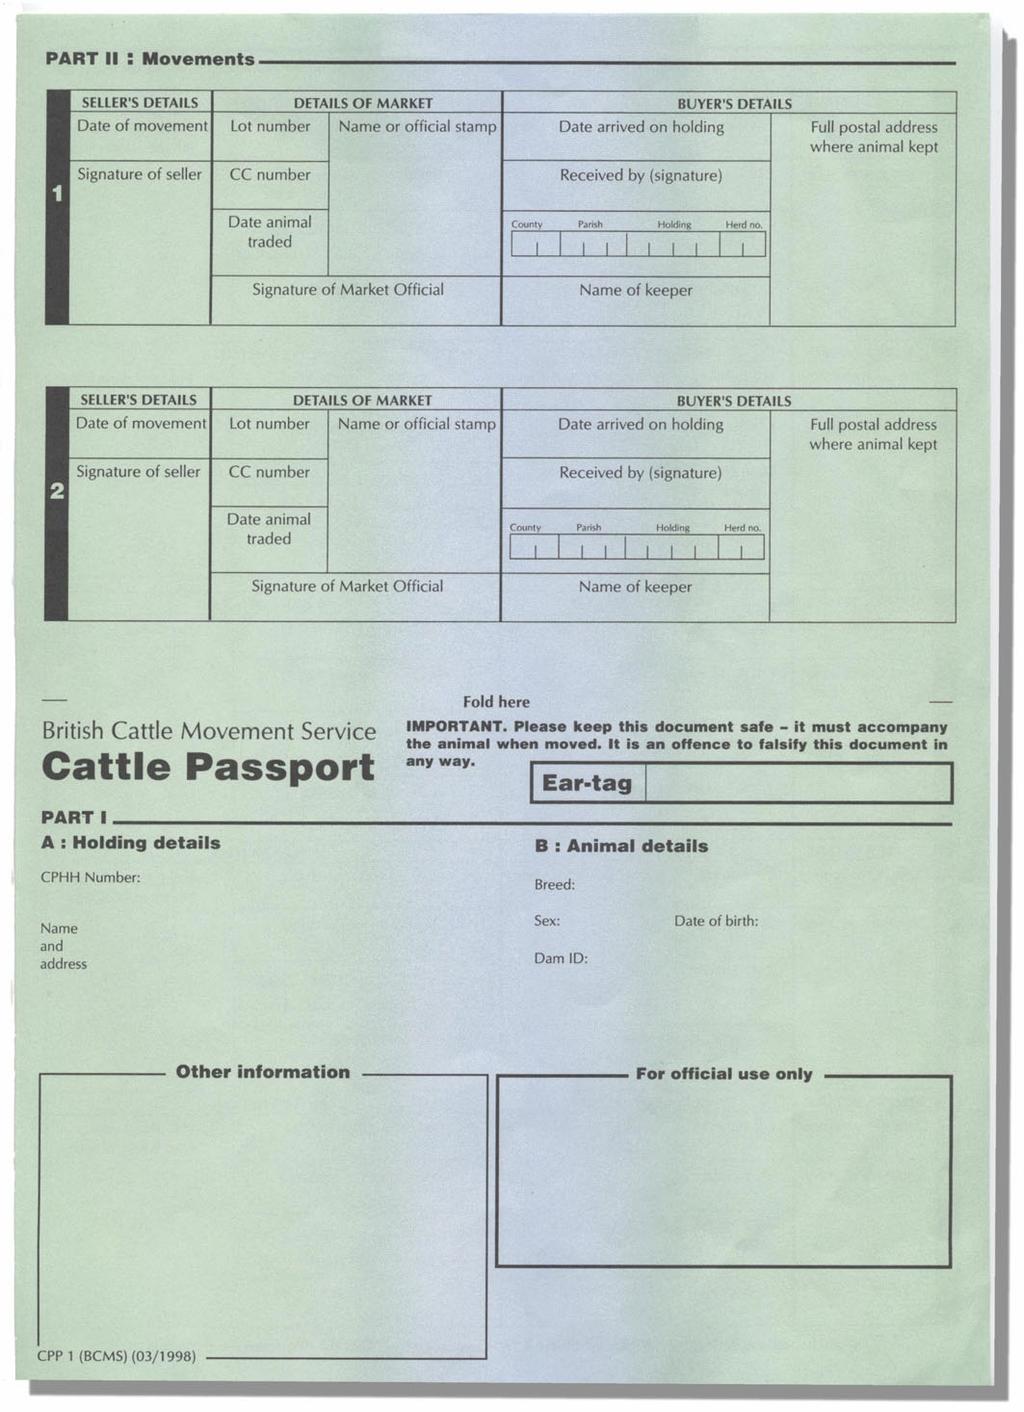 Animals registered between 1 July 1996 and 28 September 1998 have an old-style (blue and green) cattle passport (CPP1).